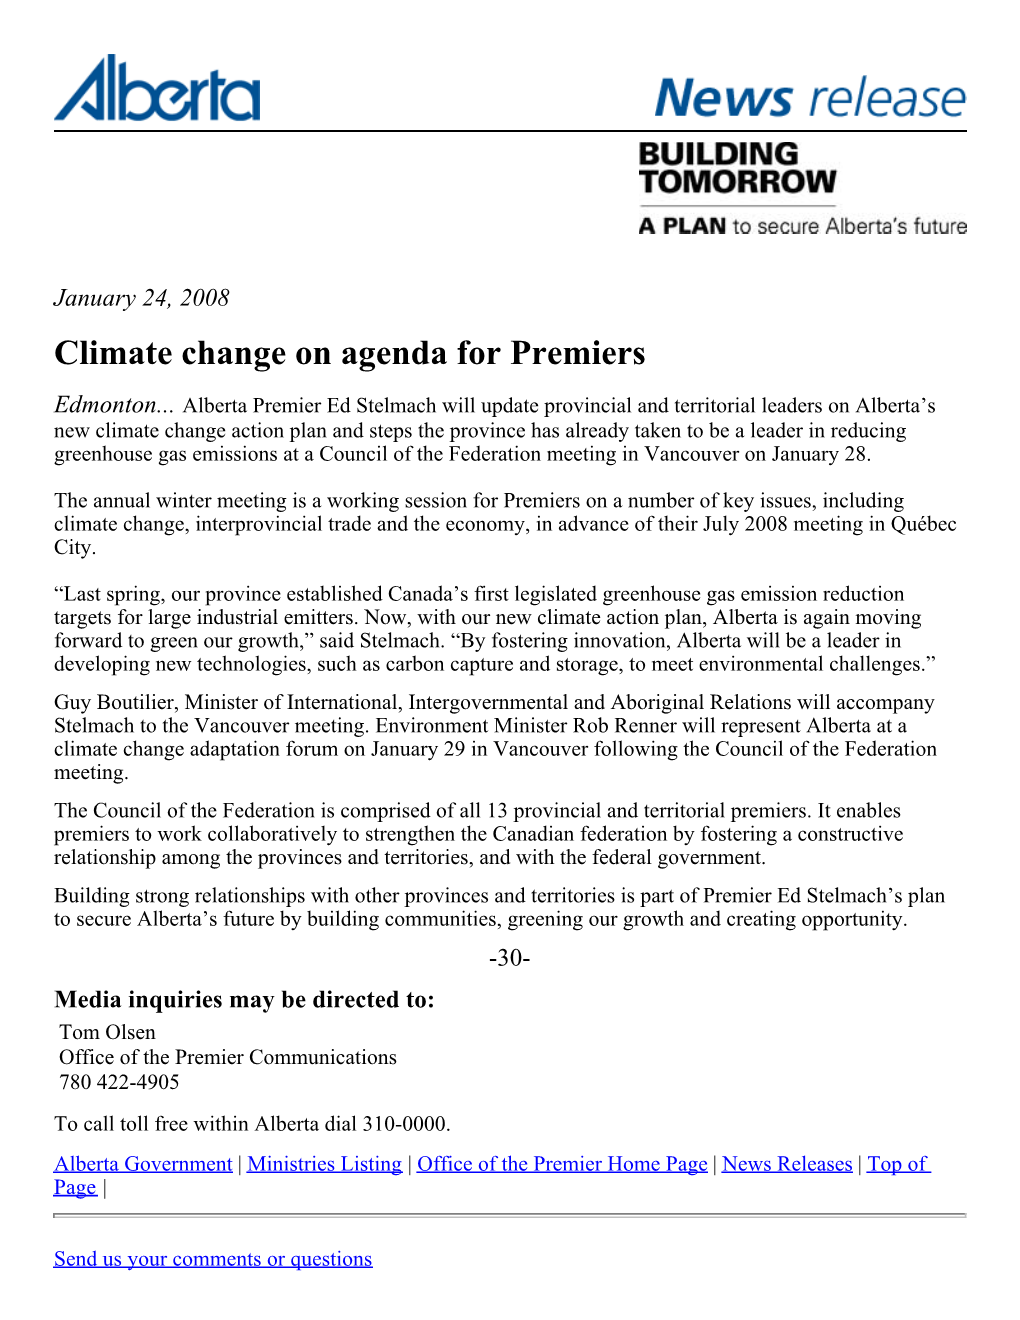 Climate Change on Agenda for Premiers